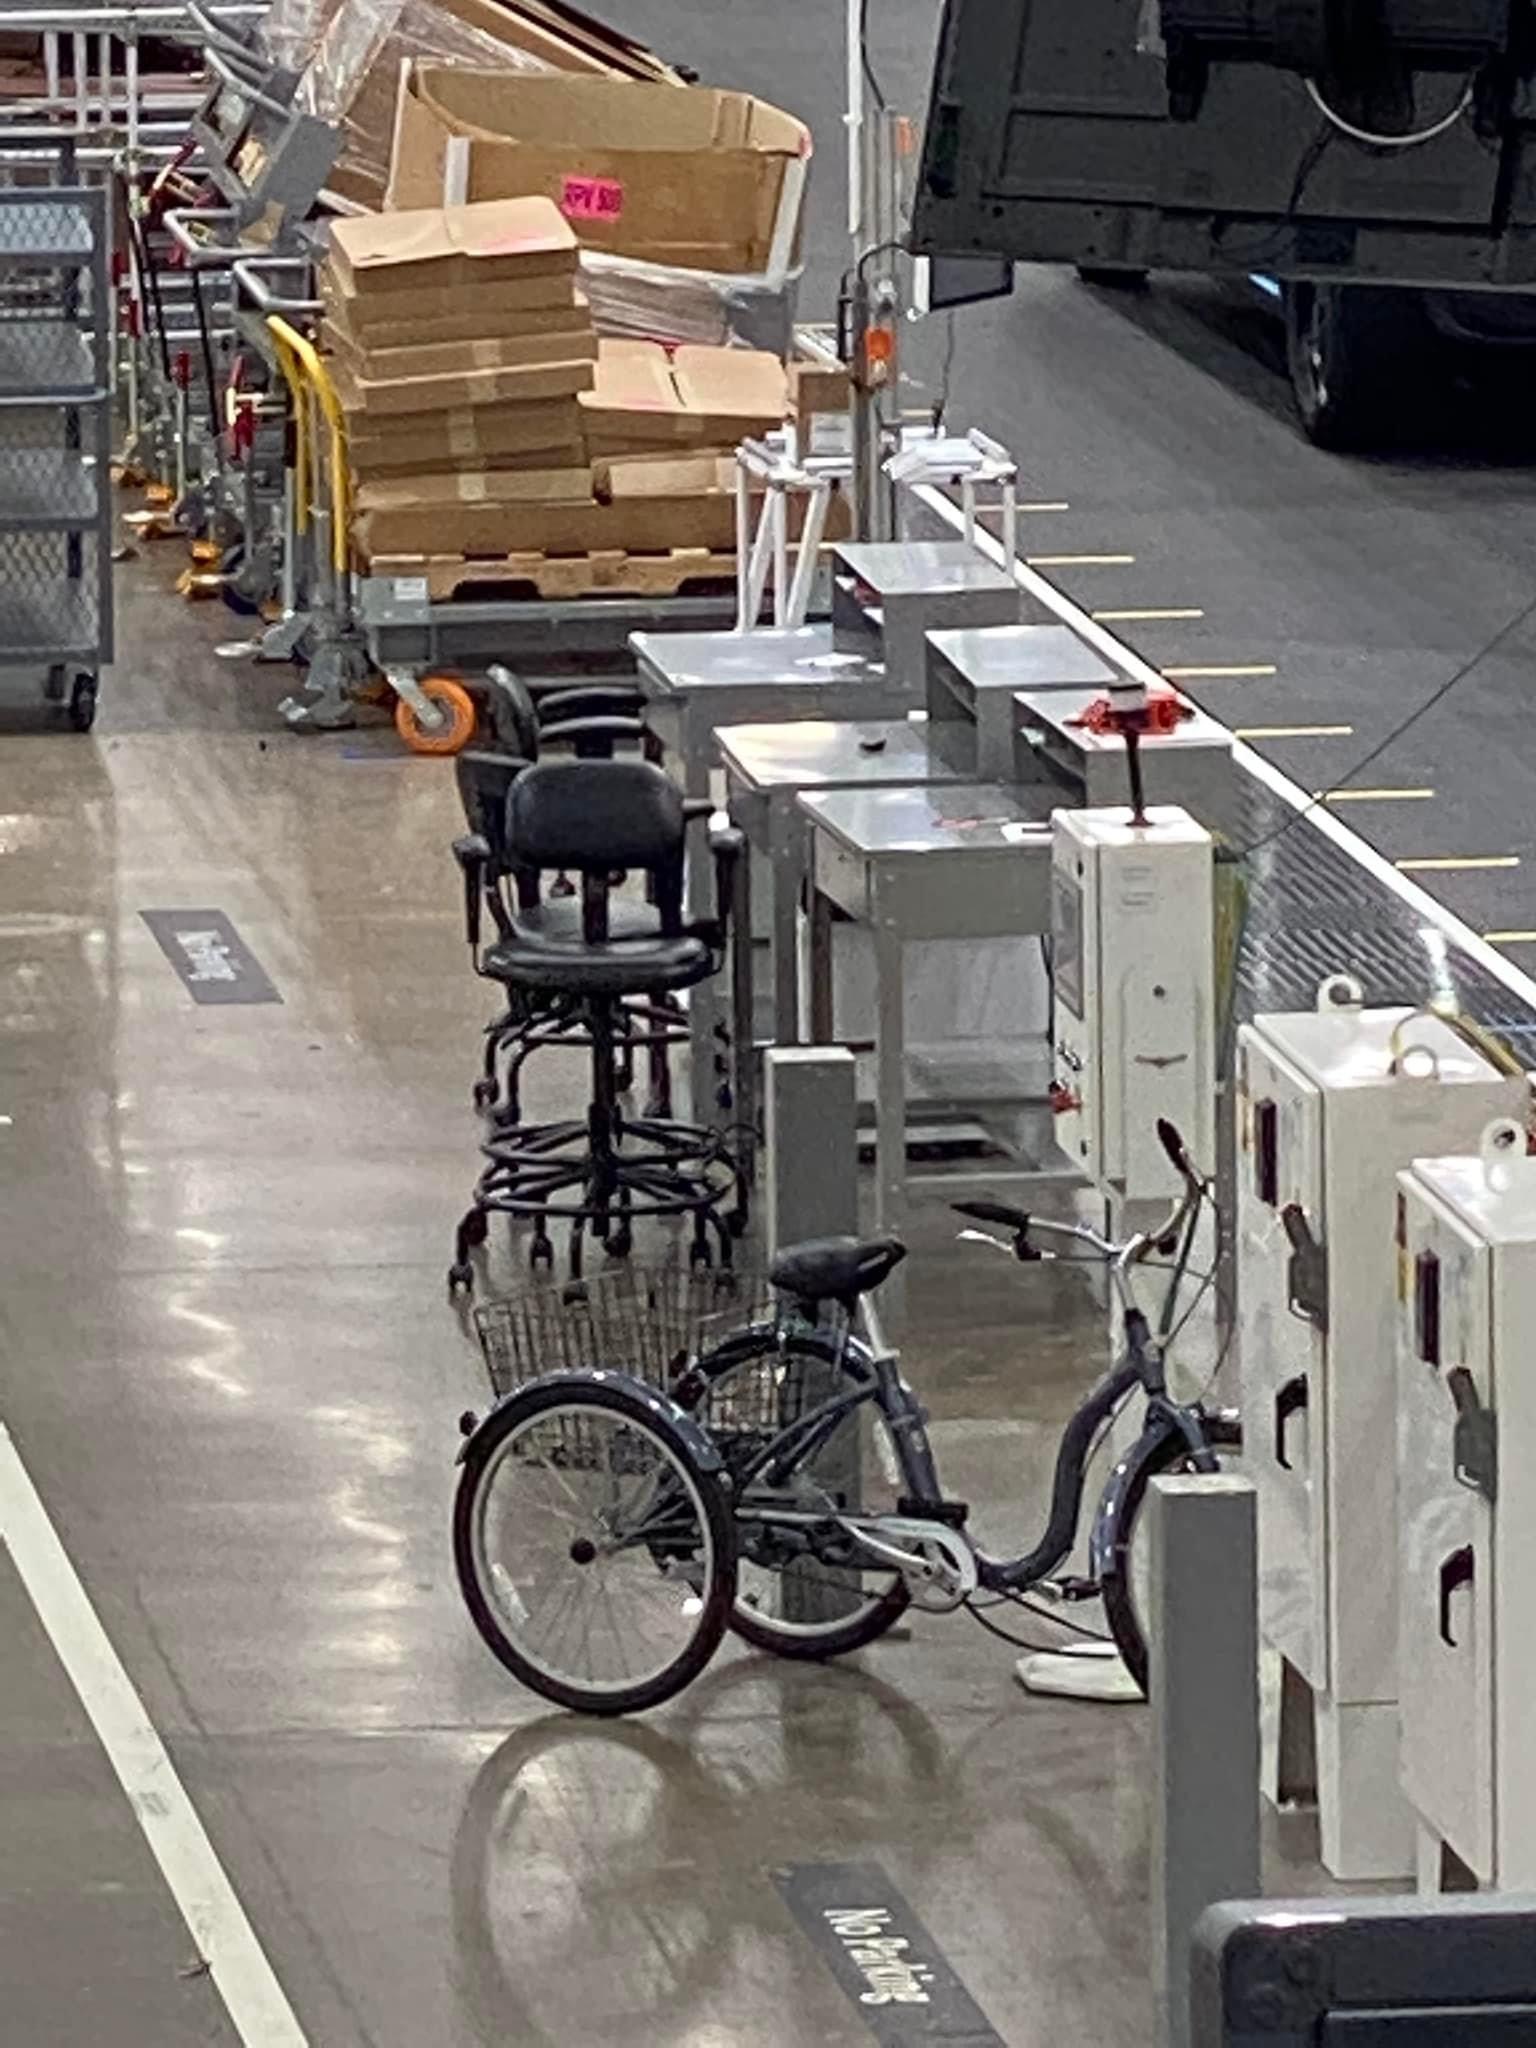 Rivian R1T R1S Tons of Rivians & Amazon Vans ready to ship... photos [removed at request of Rivian] 0A2DE880-7F2C-4ED0-82B0-289D8DF6B7F9